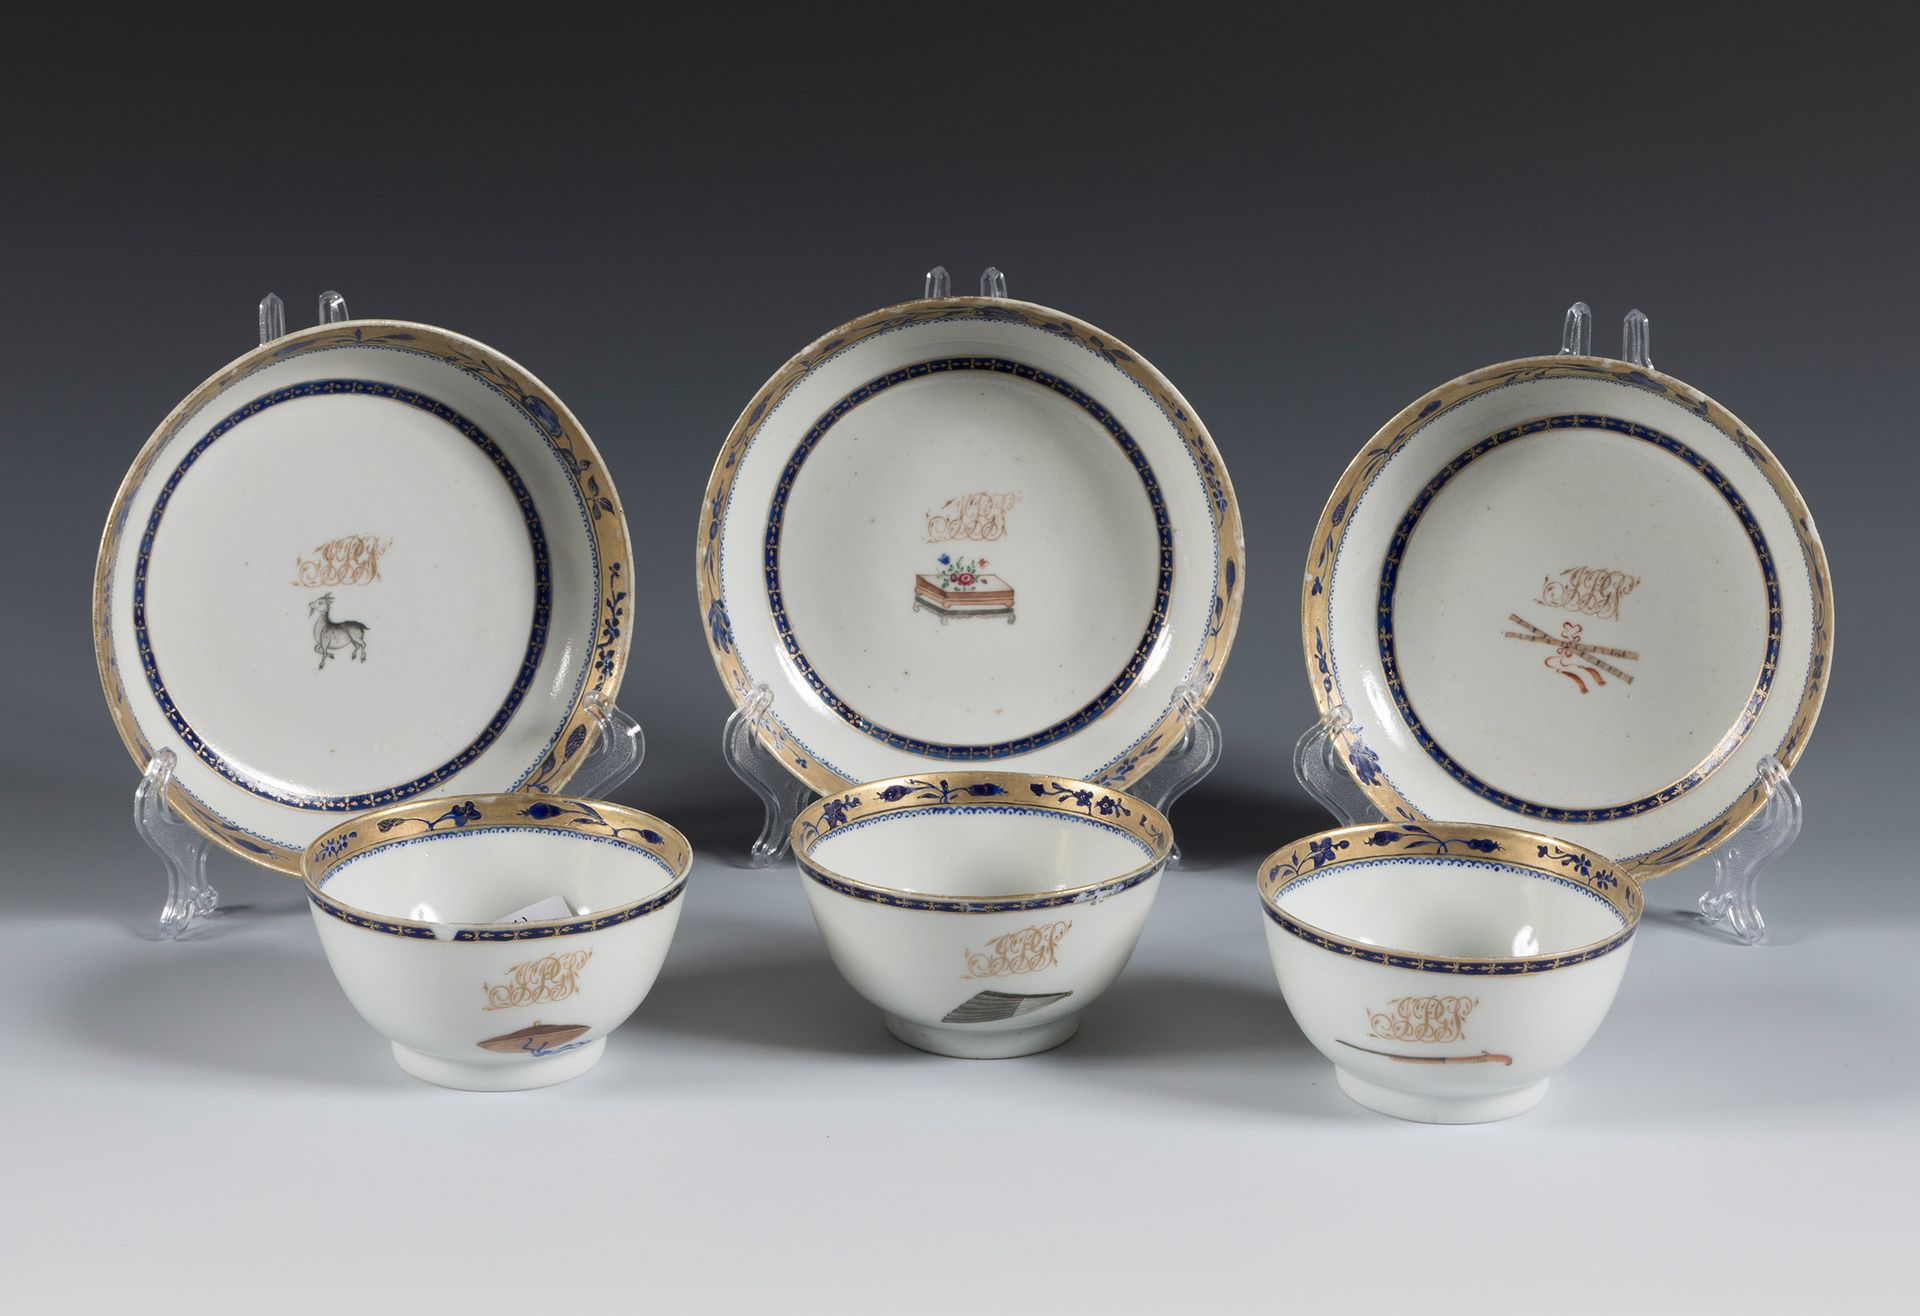 Null Tea set. East India Company, 18th century.
Enamelled porcelain.
Comprising &hellip;